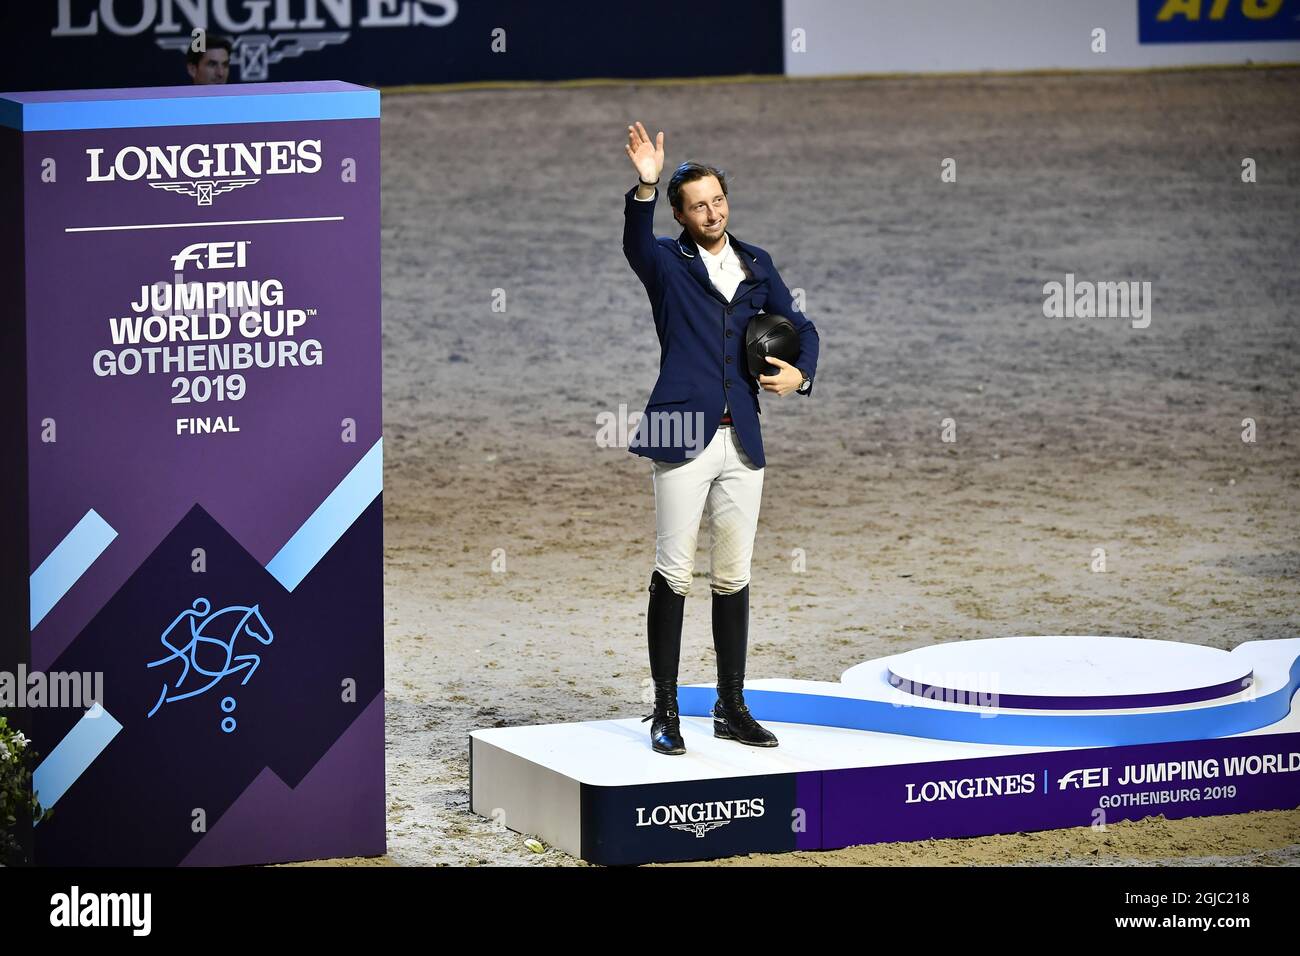 GOTHENBURG 20190407 From left Martin Fuchs of Switzerland on the podium after FEI World Cup final 3 show jumping event at Gothenburg Horse Show in Scandinavium Arena April 7, 2019. Photo Bjorn Larsson Rosvall / TT kod 9200  Stock Photo